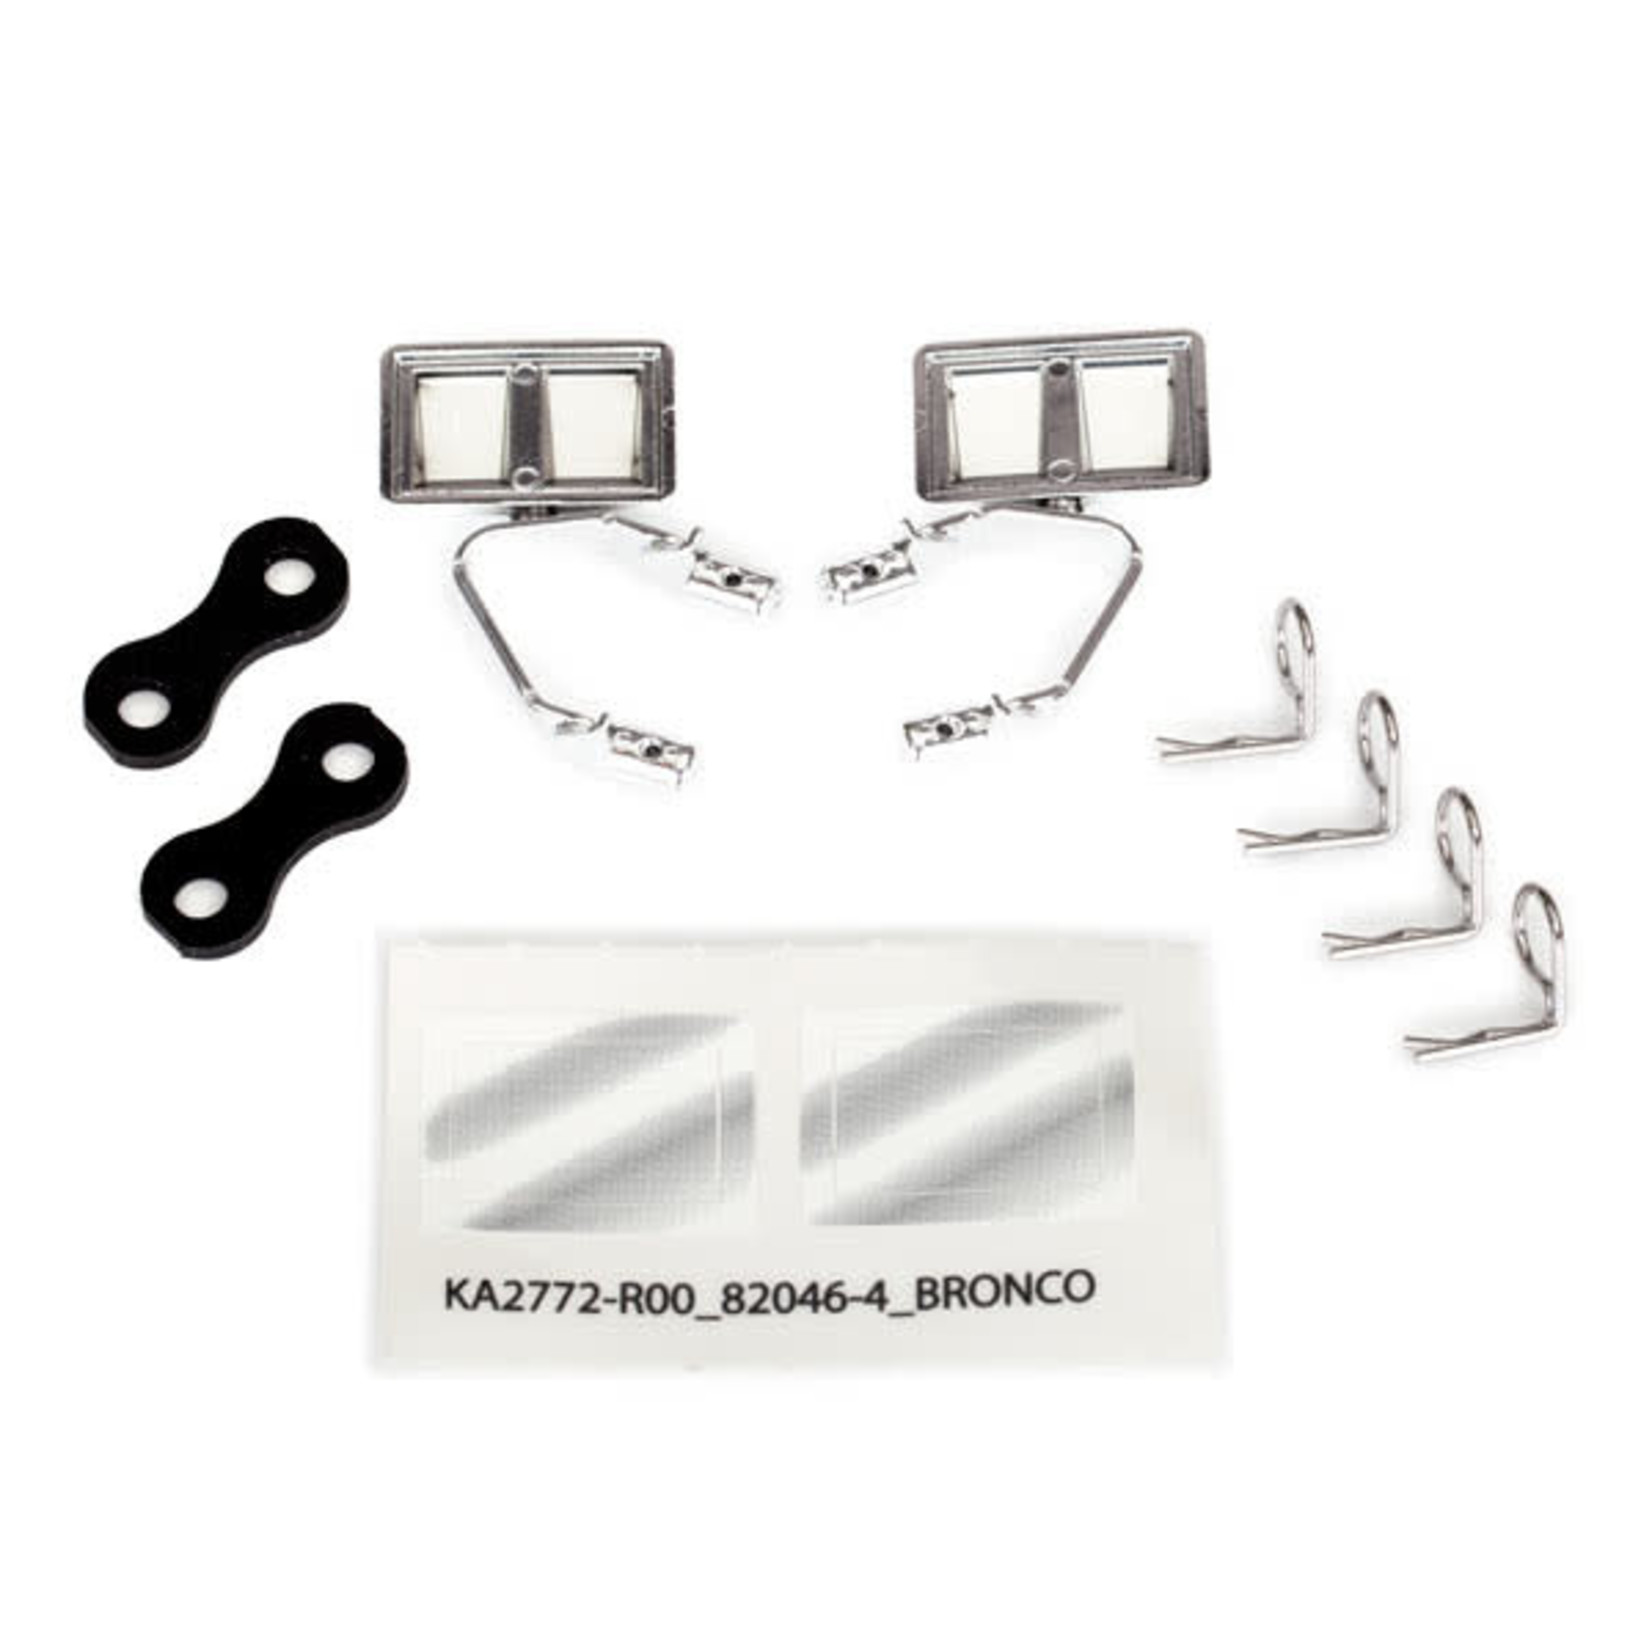 Traxxas 8073X Mirrors, side, chrome (left & right)/ retainers (2)/ body clips (4) (fits #8010 body)